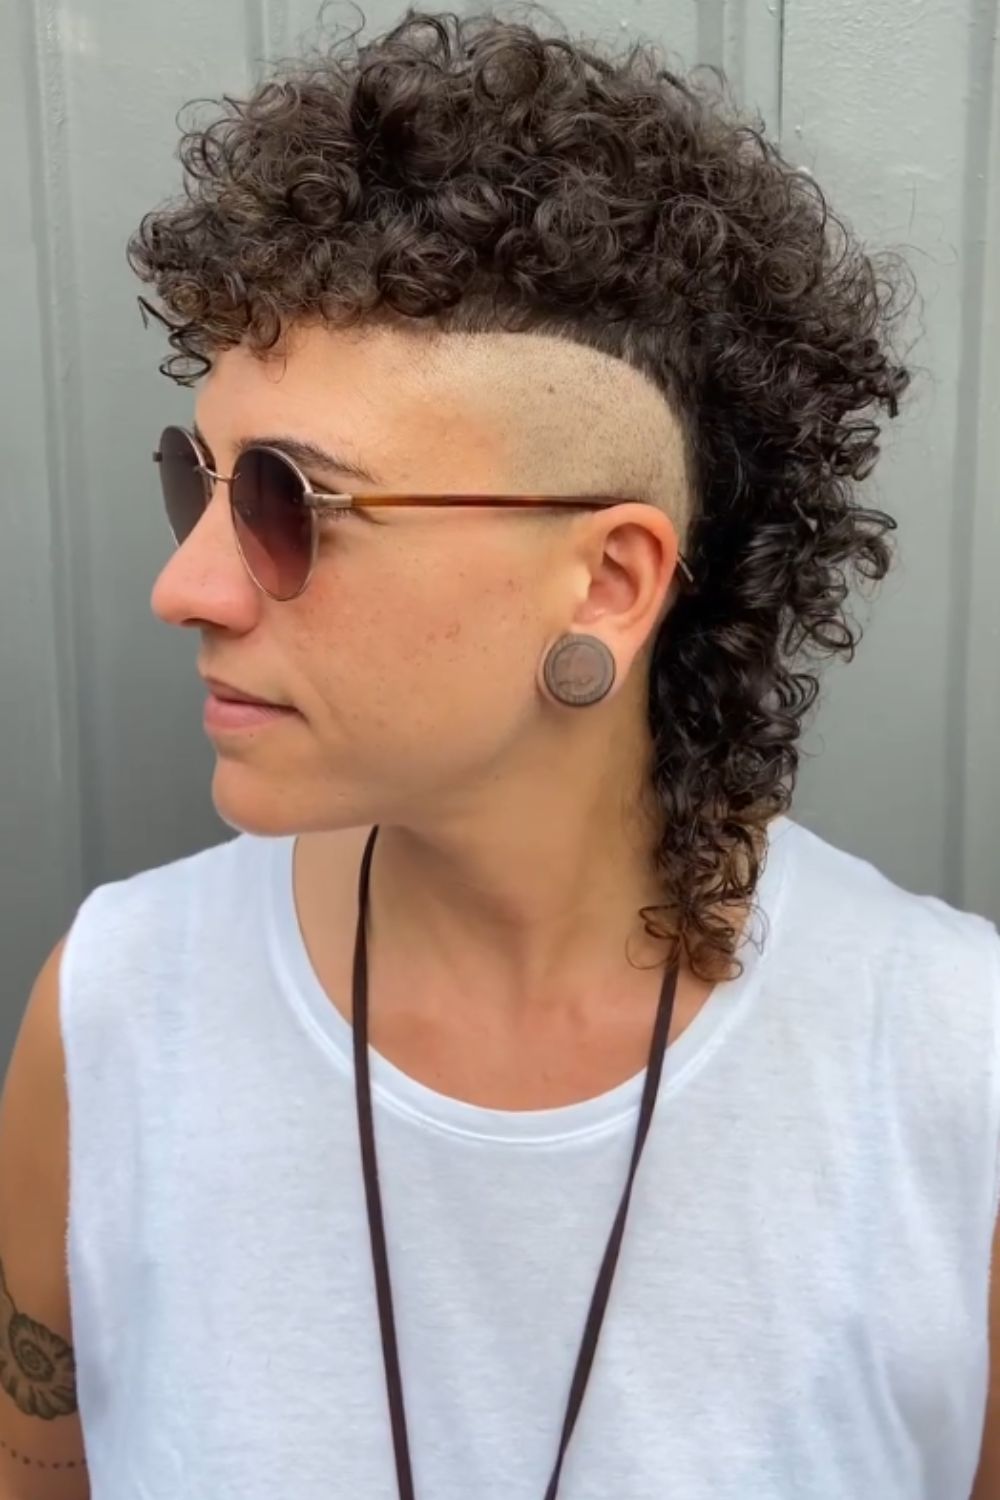 A man wearing sunglasses with curly mullet with bald fade.